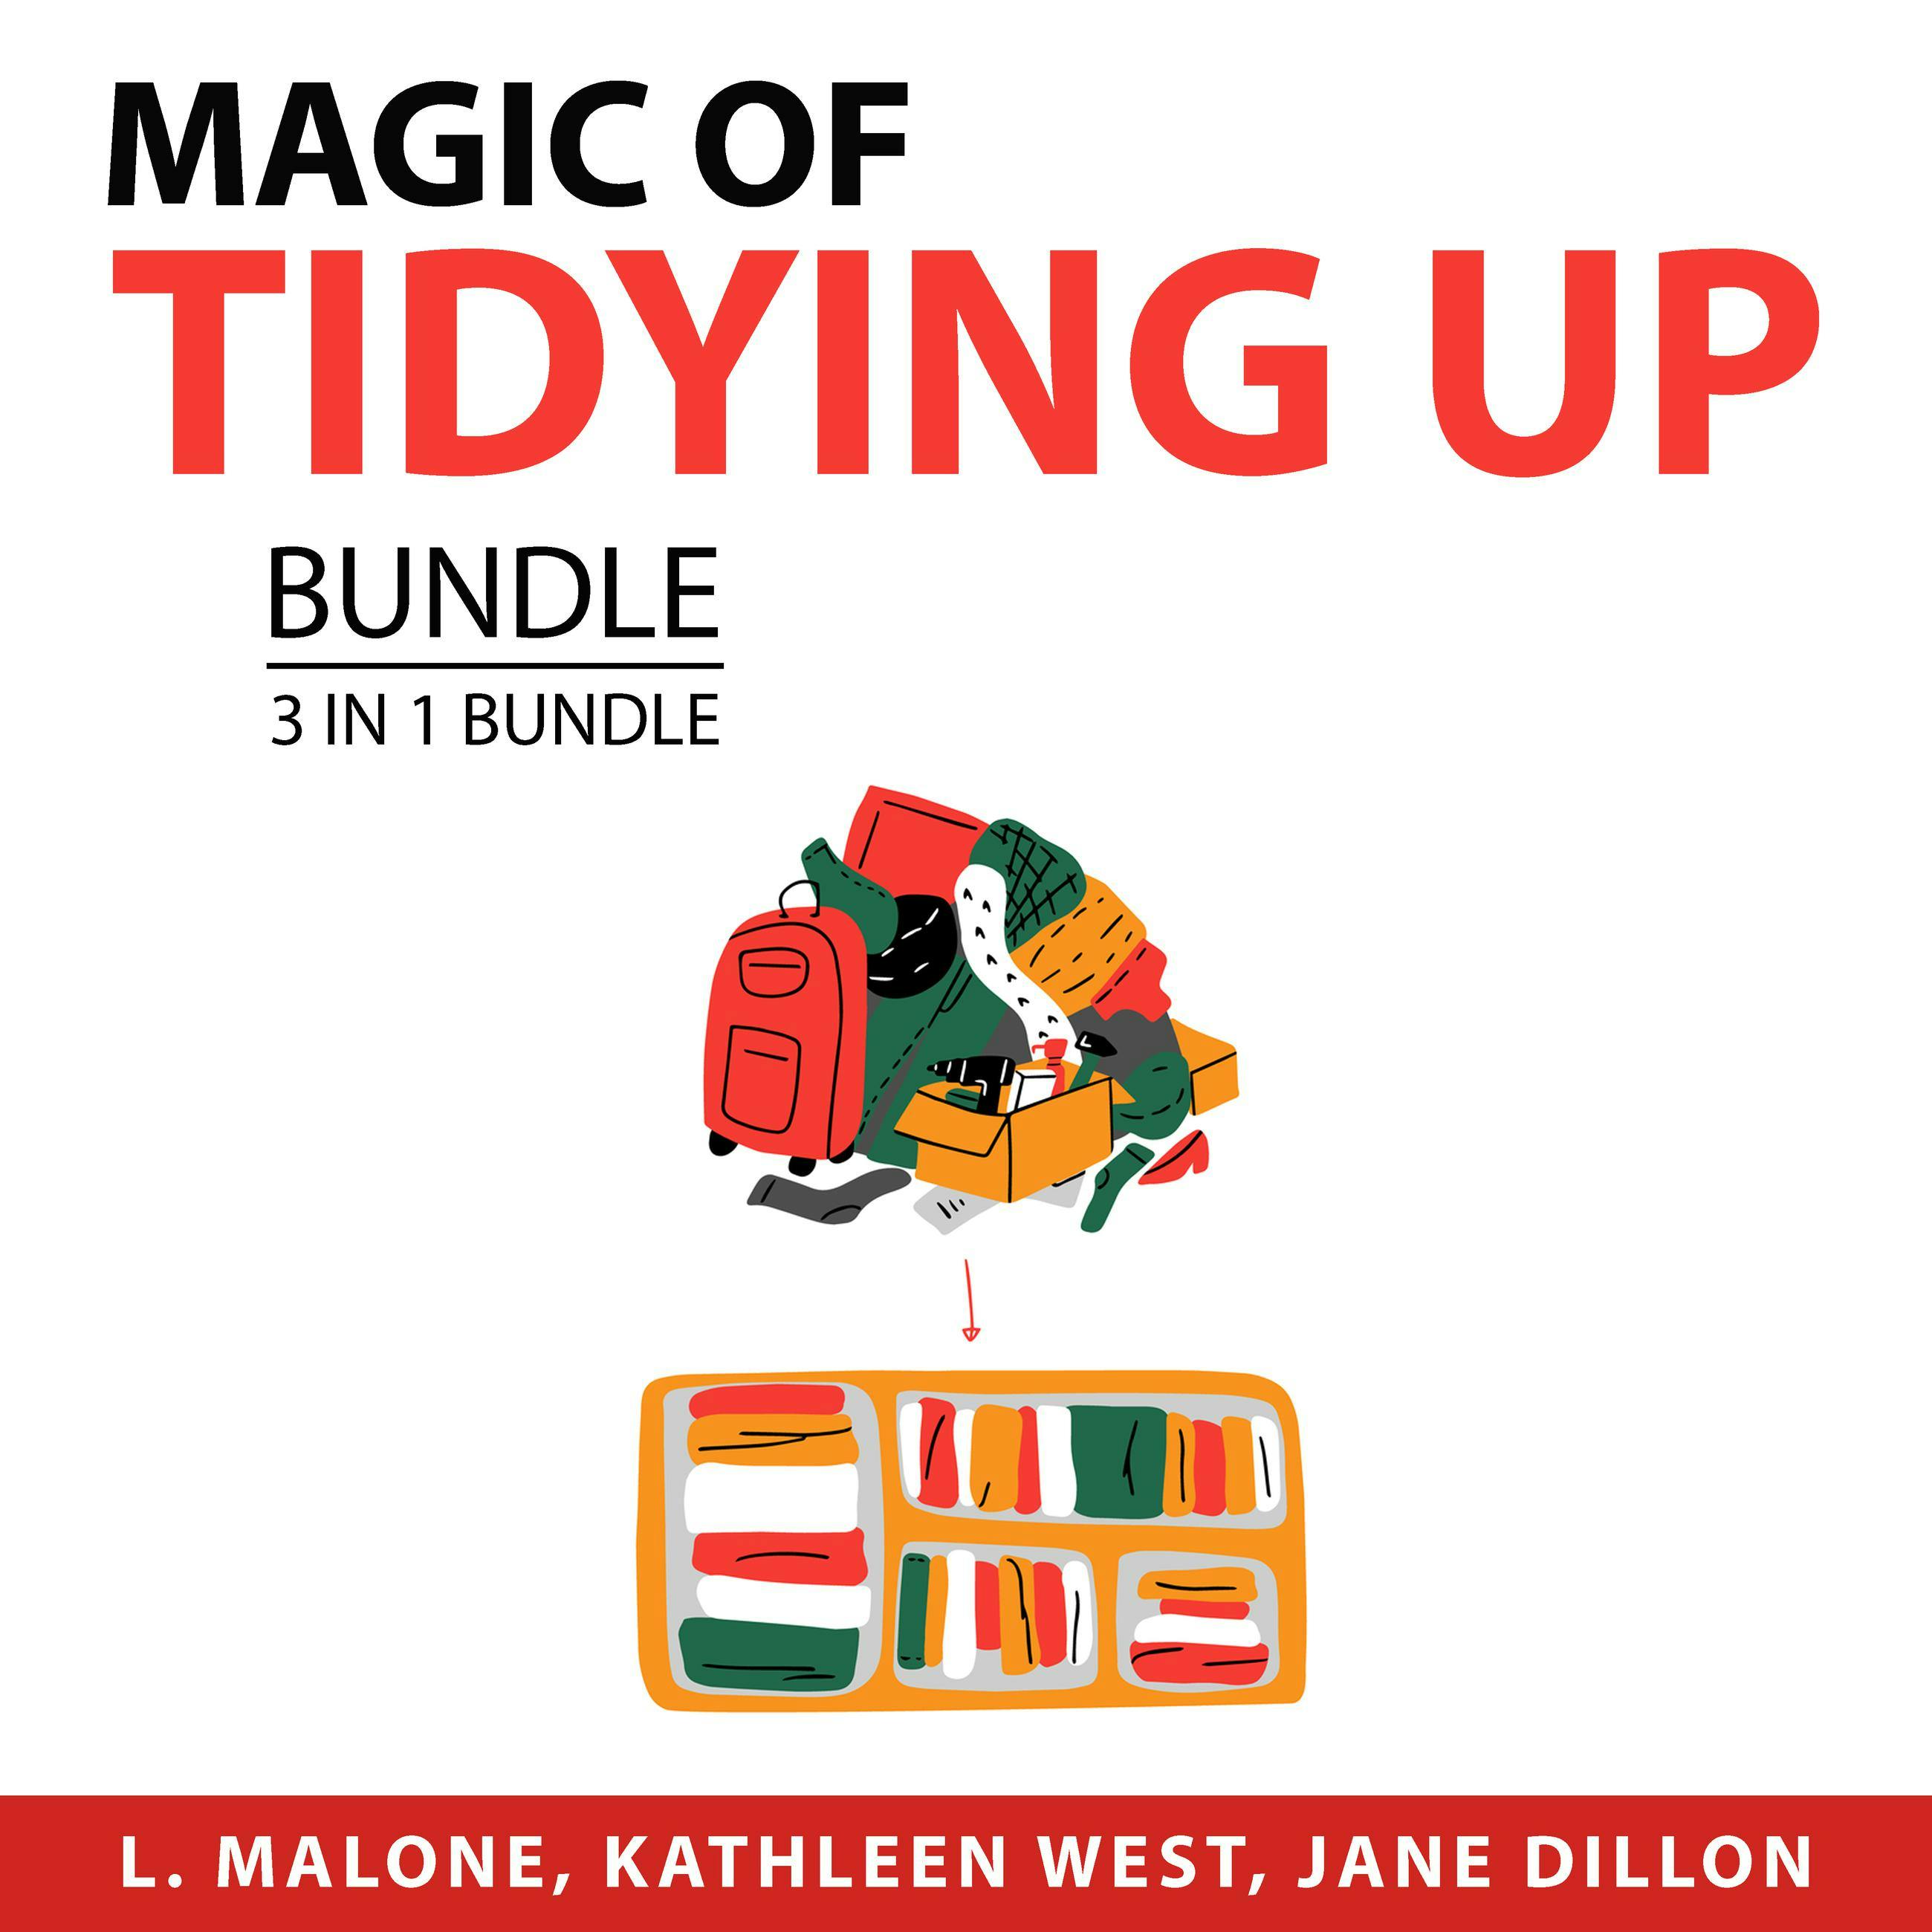 Magic of Tidying Up Bundle, 3 in 1 Bundle: Secrets to a Clean and Organized Home, Ultimate Organization Tips, and Declutter and Organize Your Home - L. Malone, Kathleen West, Jane Dillon